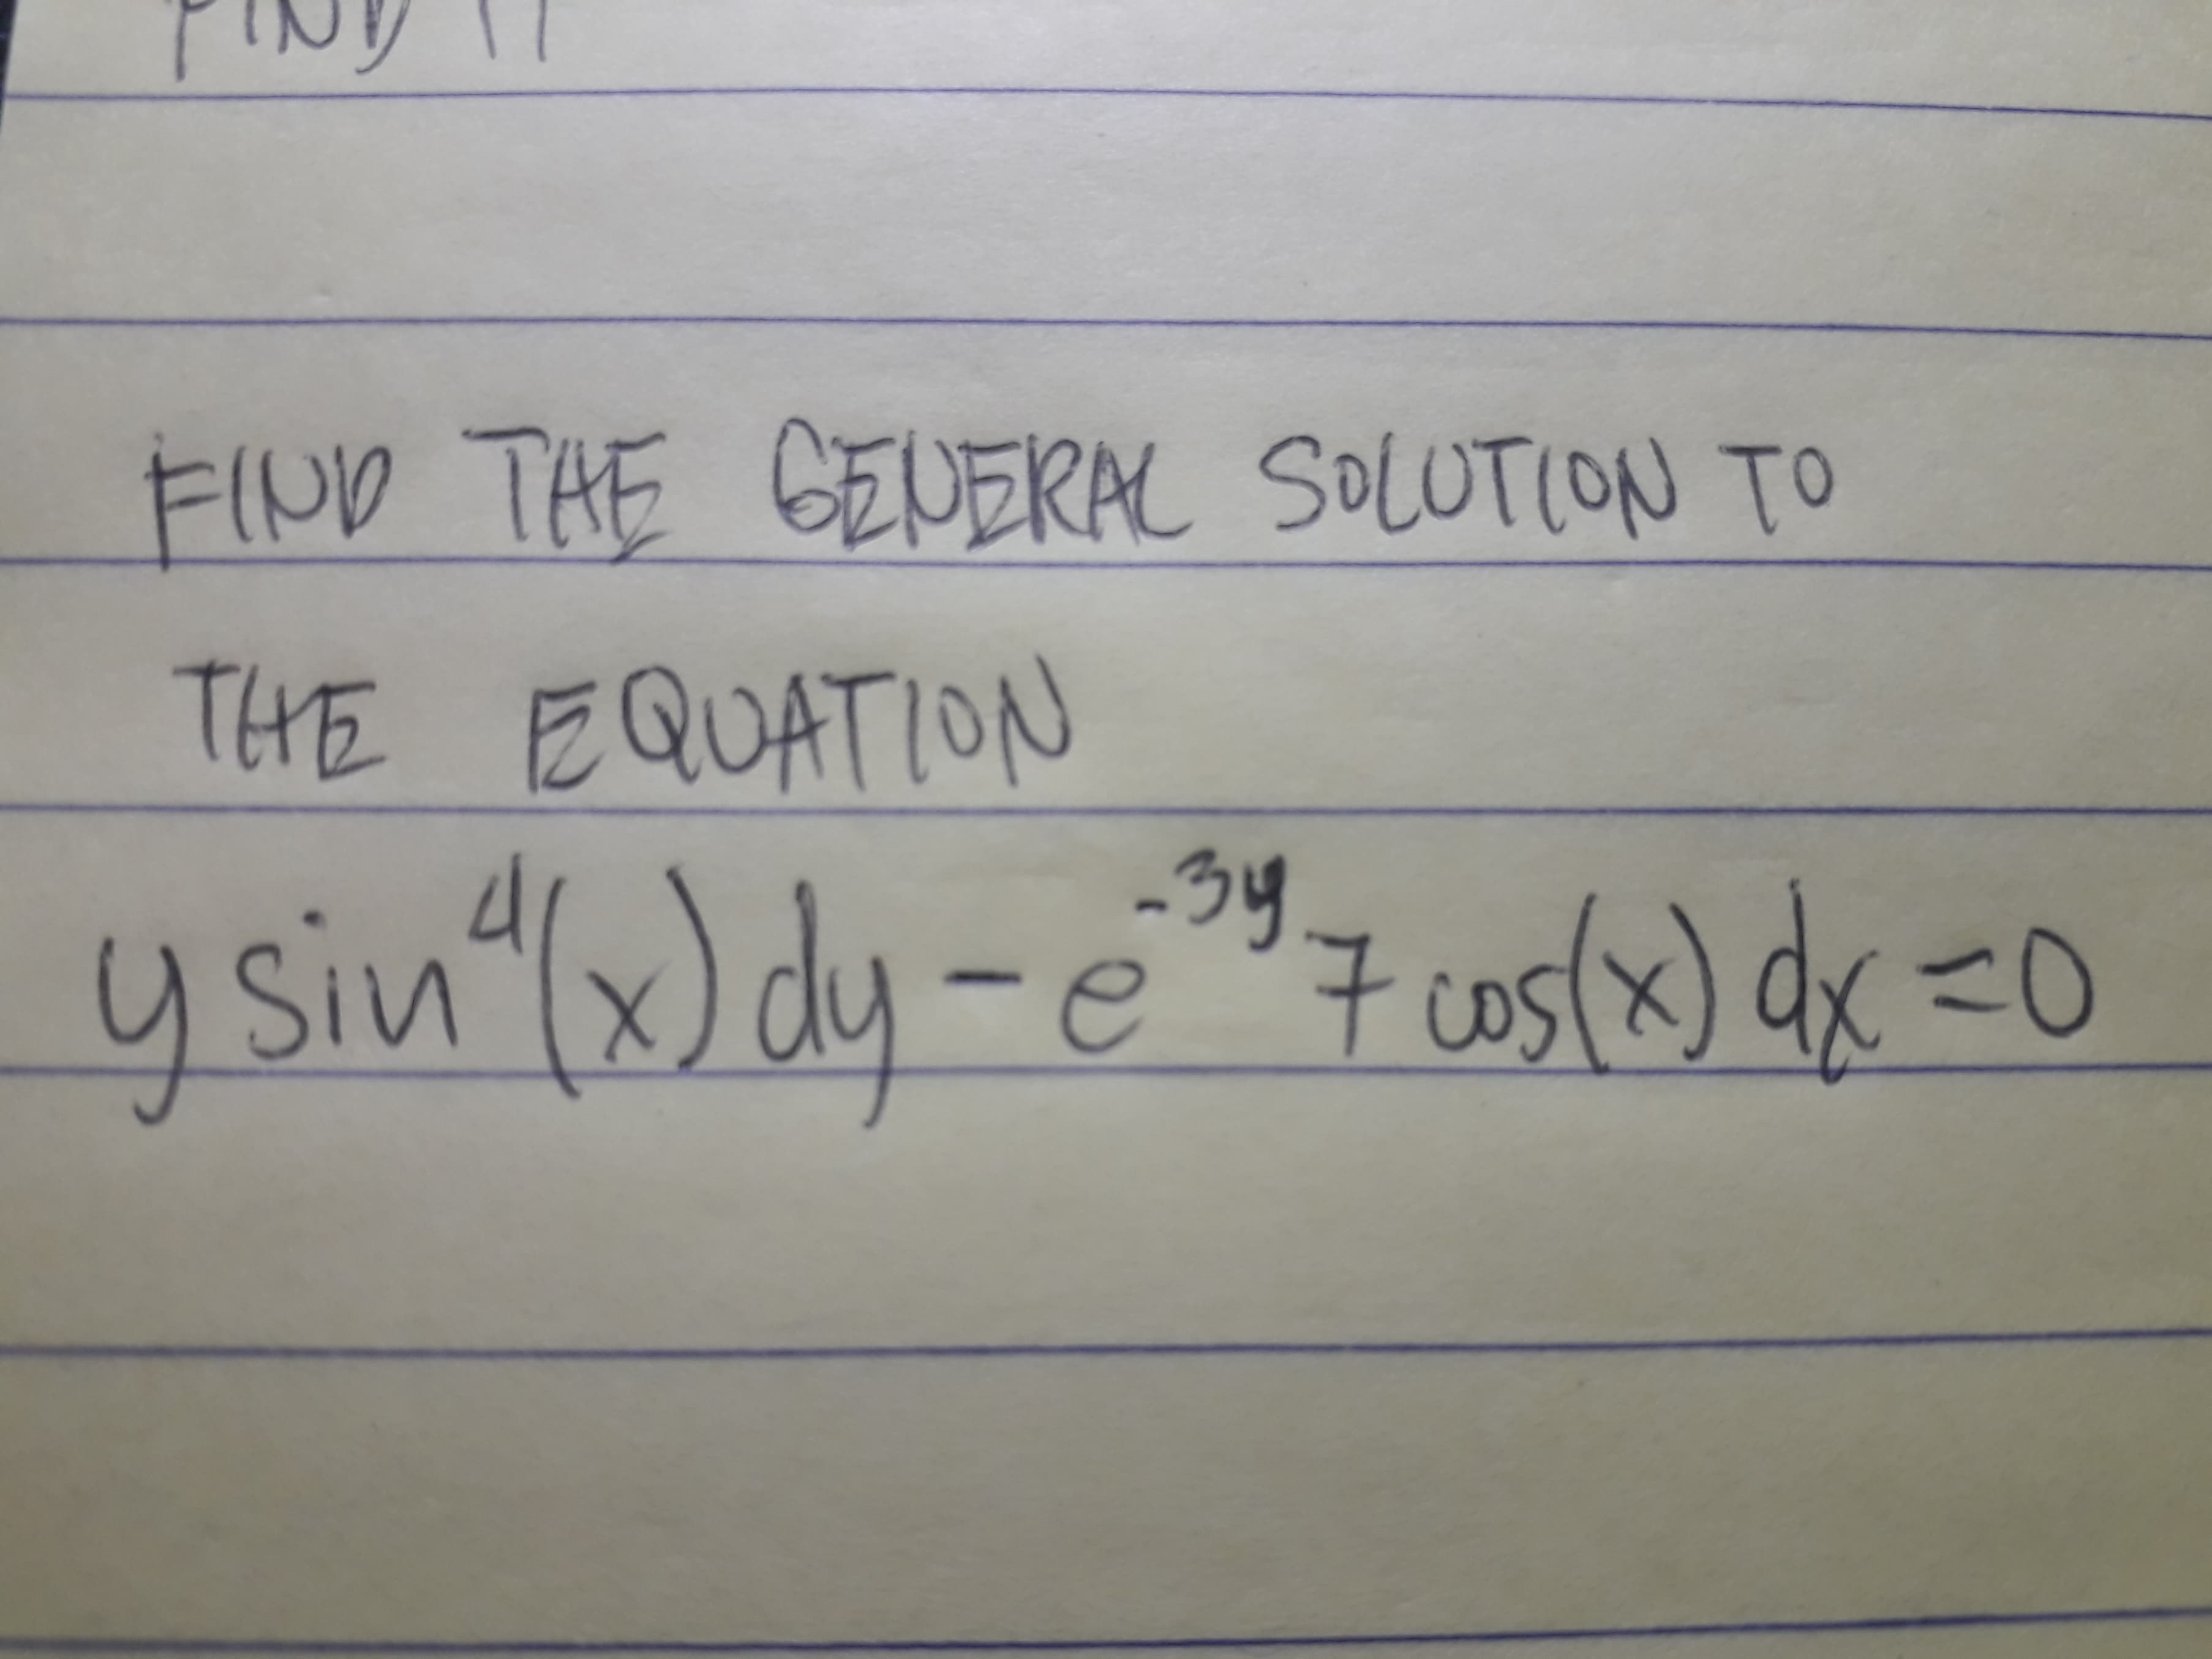 FIND THE GEUERAL SOLUTION TO
THE EQUATION
ysin"(x)dy-e
-3y
y sin
e"7cos(x) dx =0
